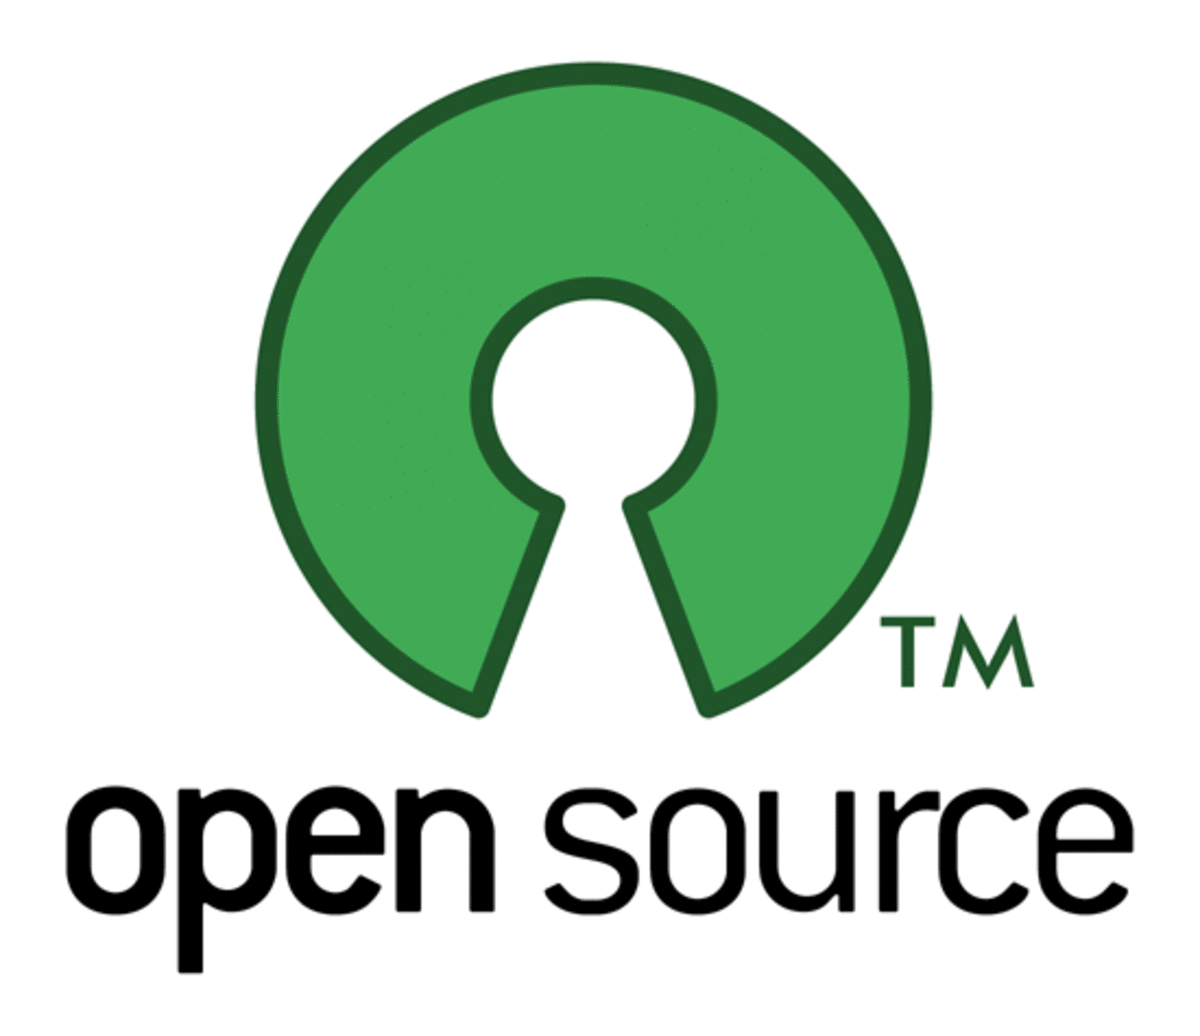 7 Free and Open Source Software for Windows PC